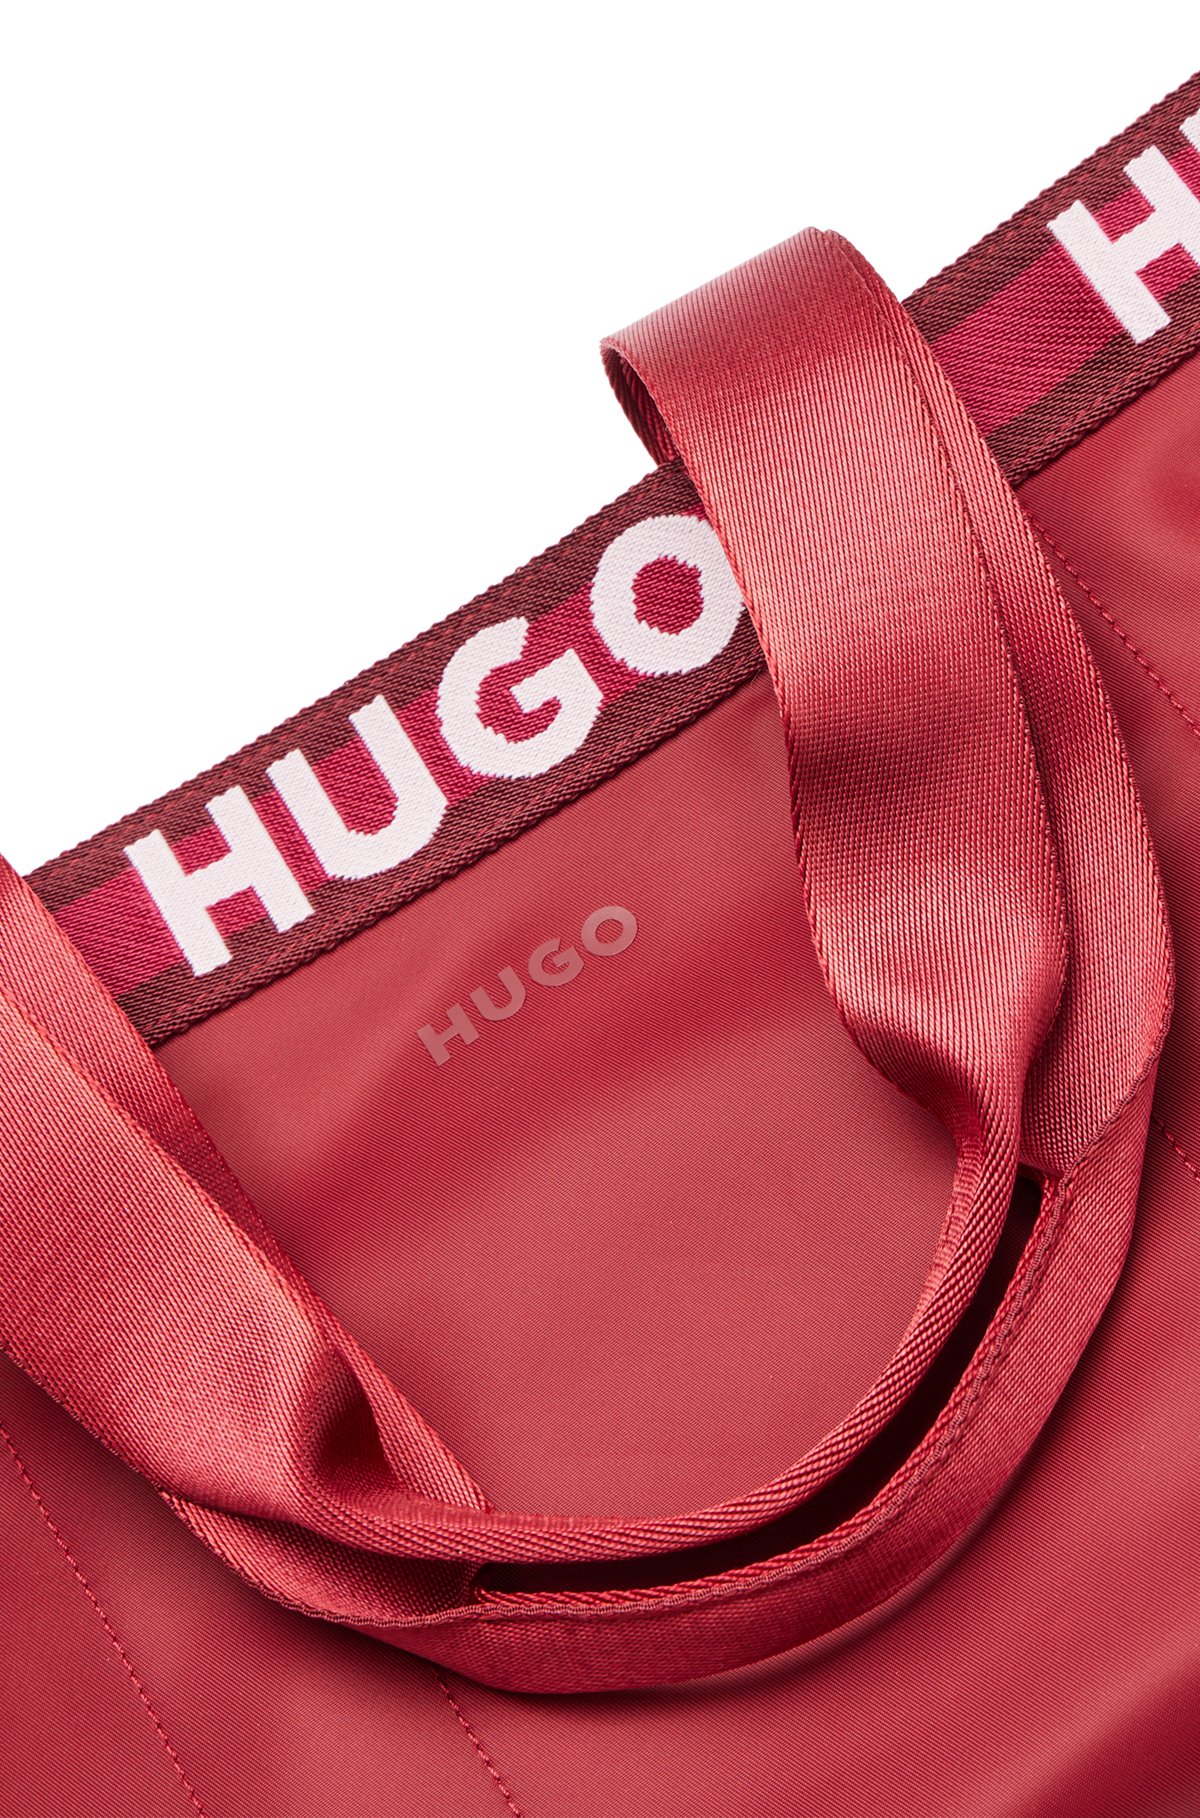 Tote bag with repeat contrast-logo details, Dark Red